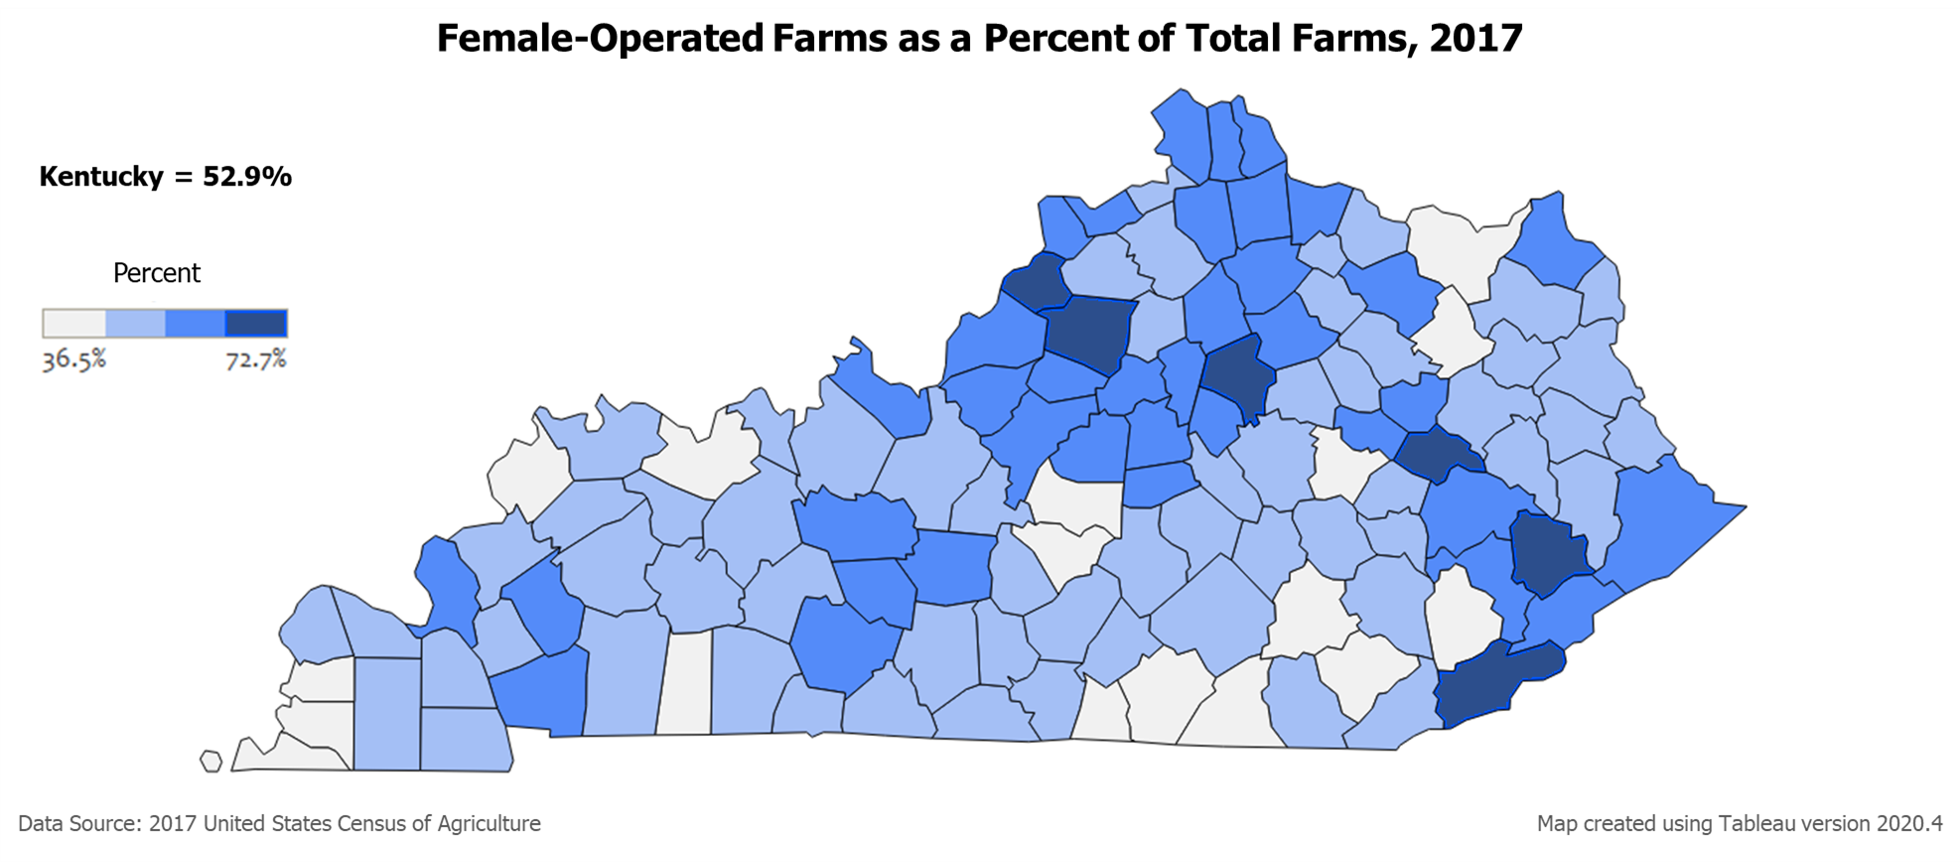 Female-Operated Farms as a Percent of Total Farms, 2017